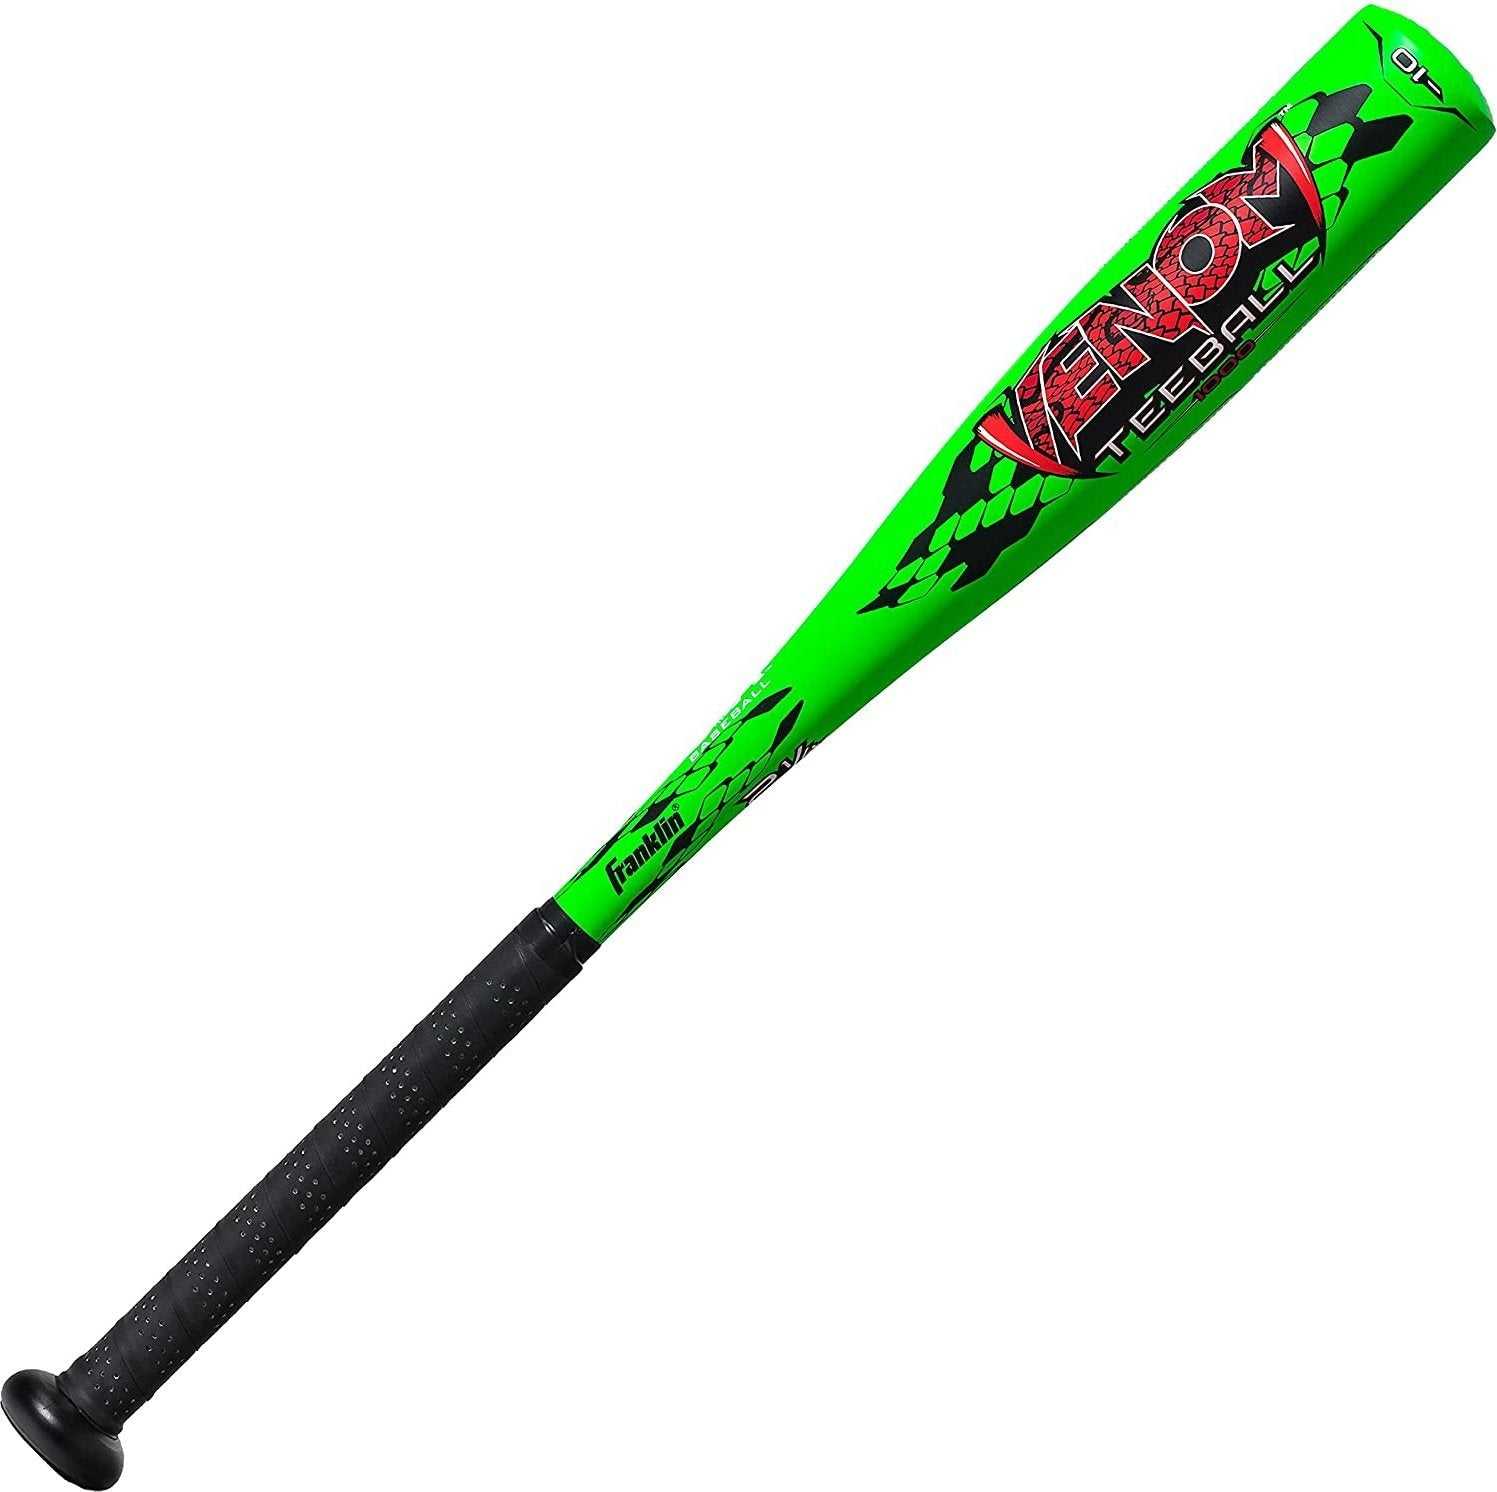 Franklin Venom 1000 (-10) USA Approved 2 1/4" Tee Ball Bat - Black Green - HIT a Double